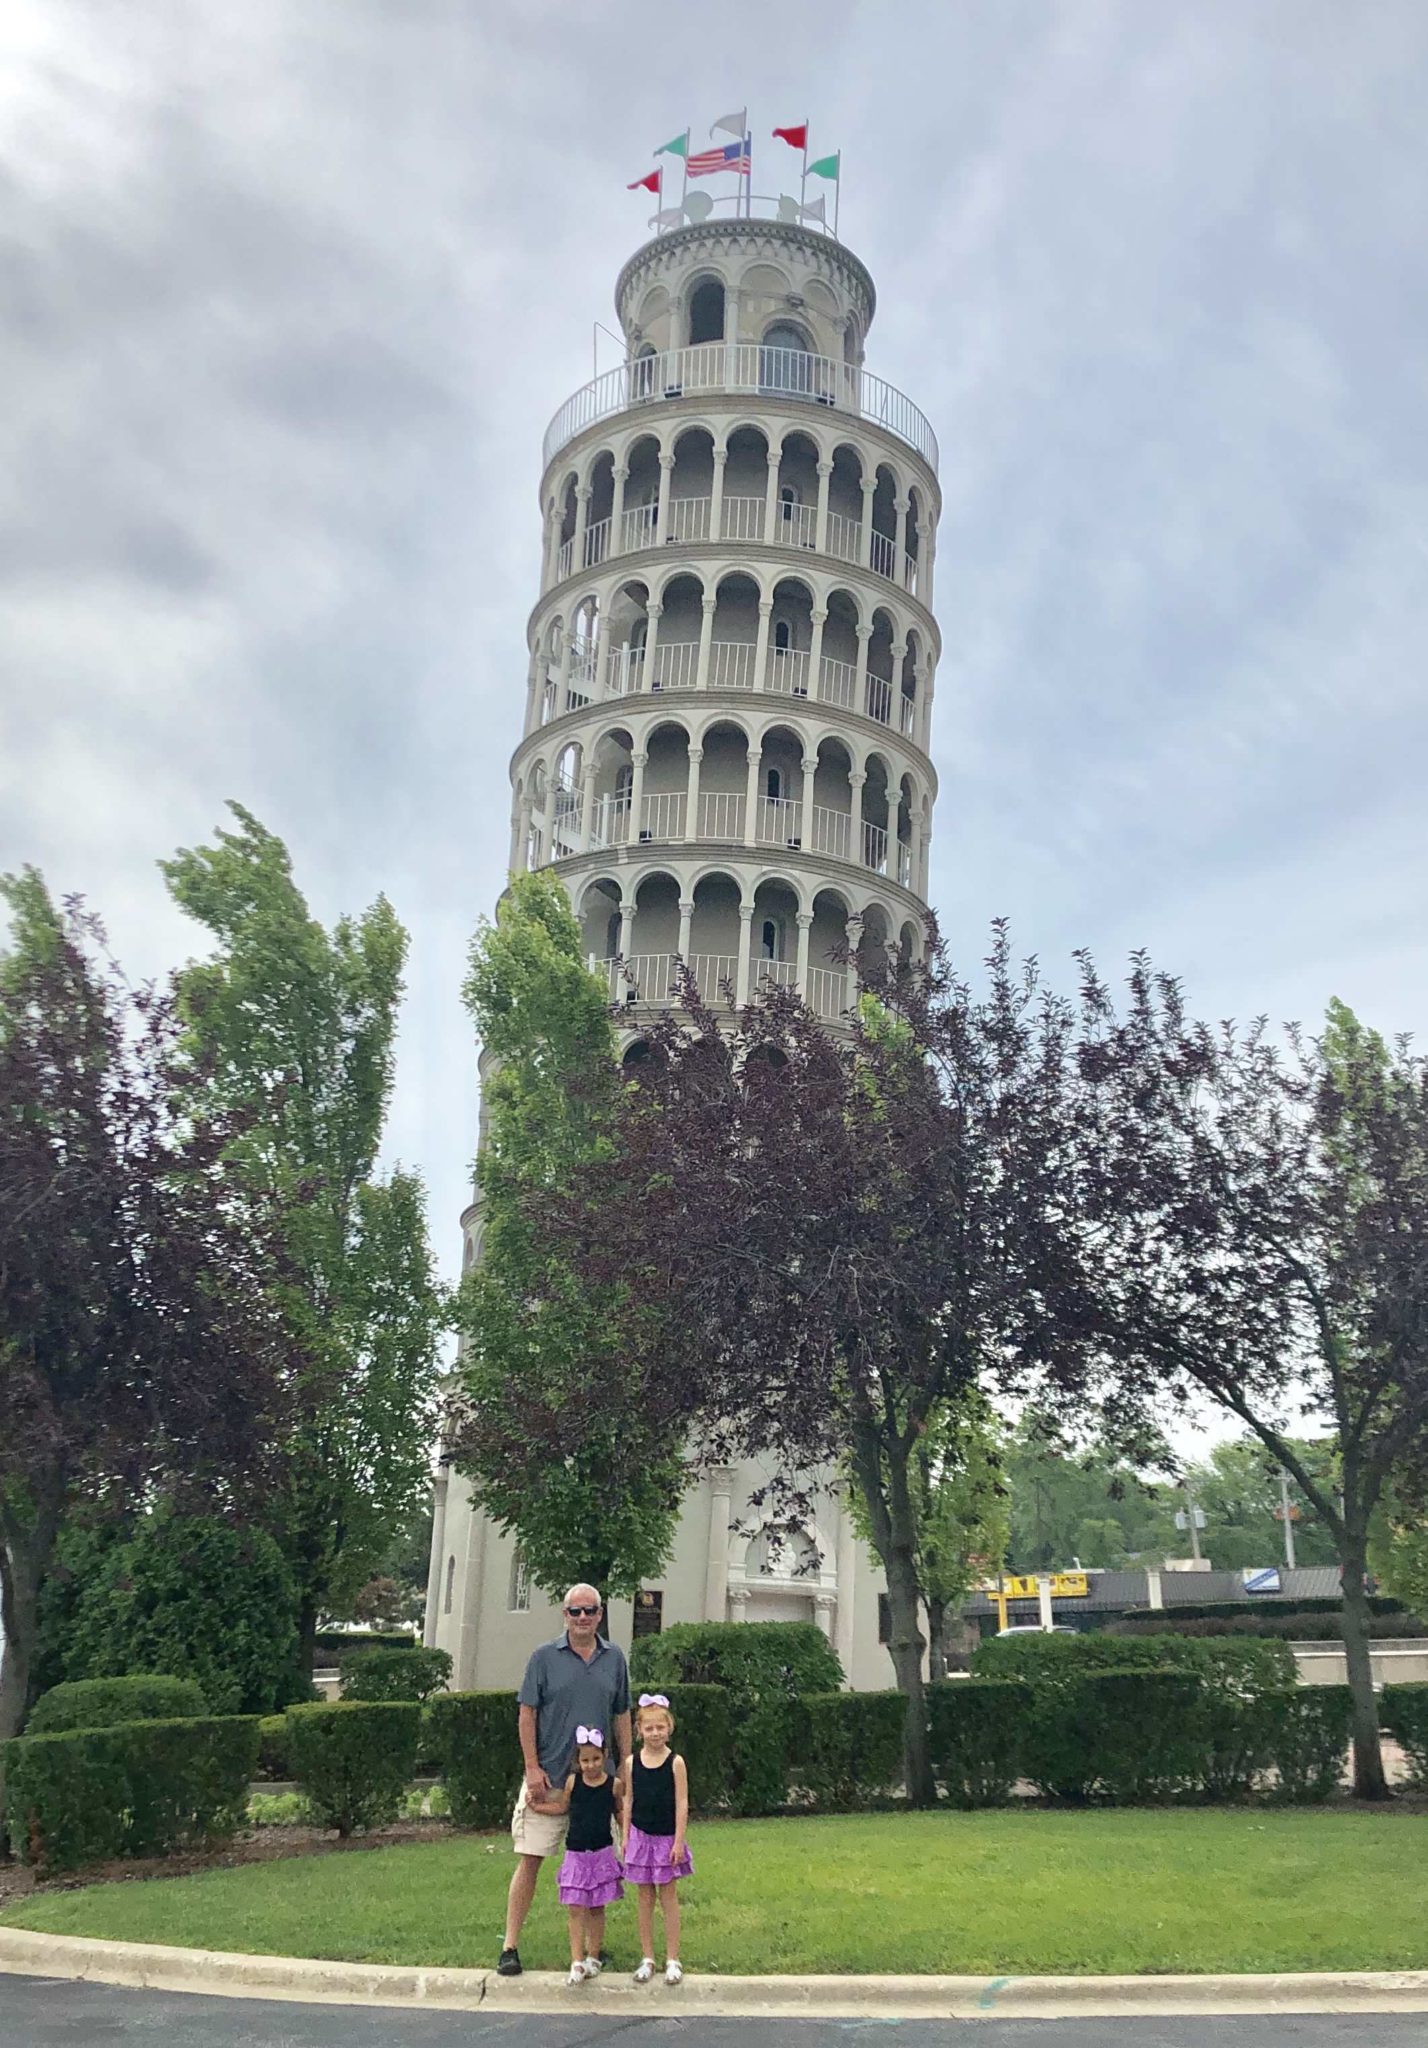 Leaning Tower of Niles - Another Roadside attraction